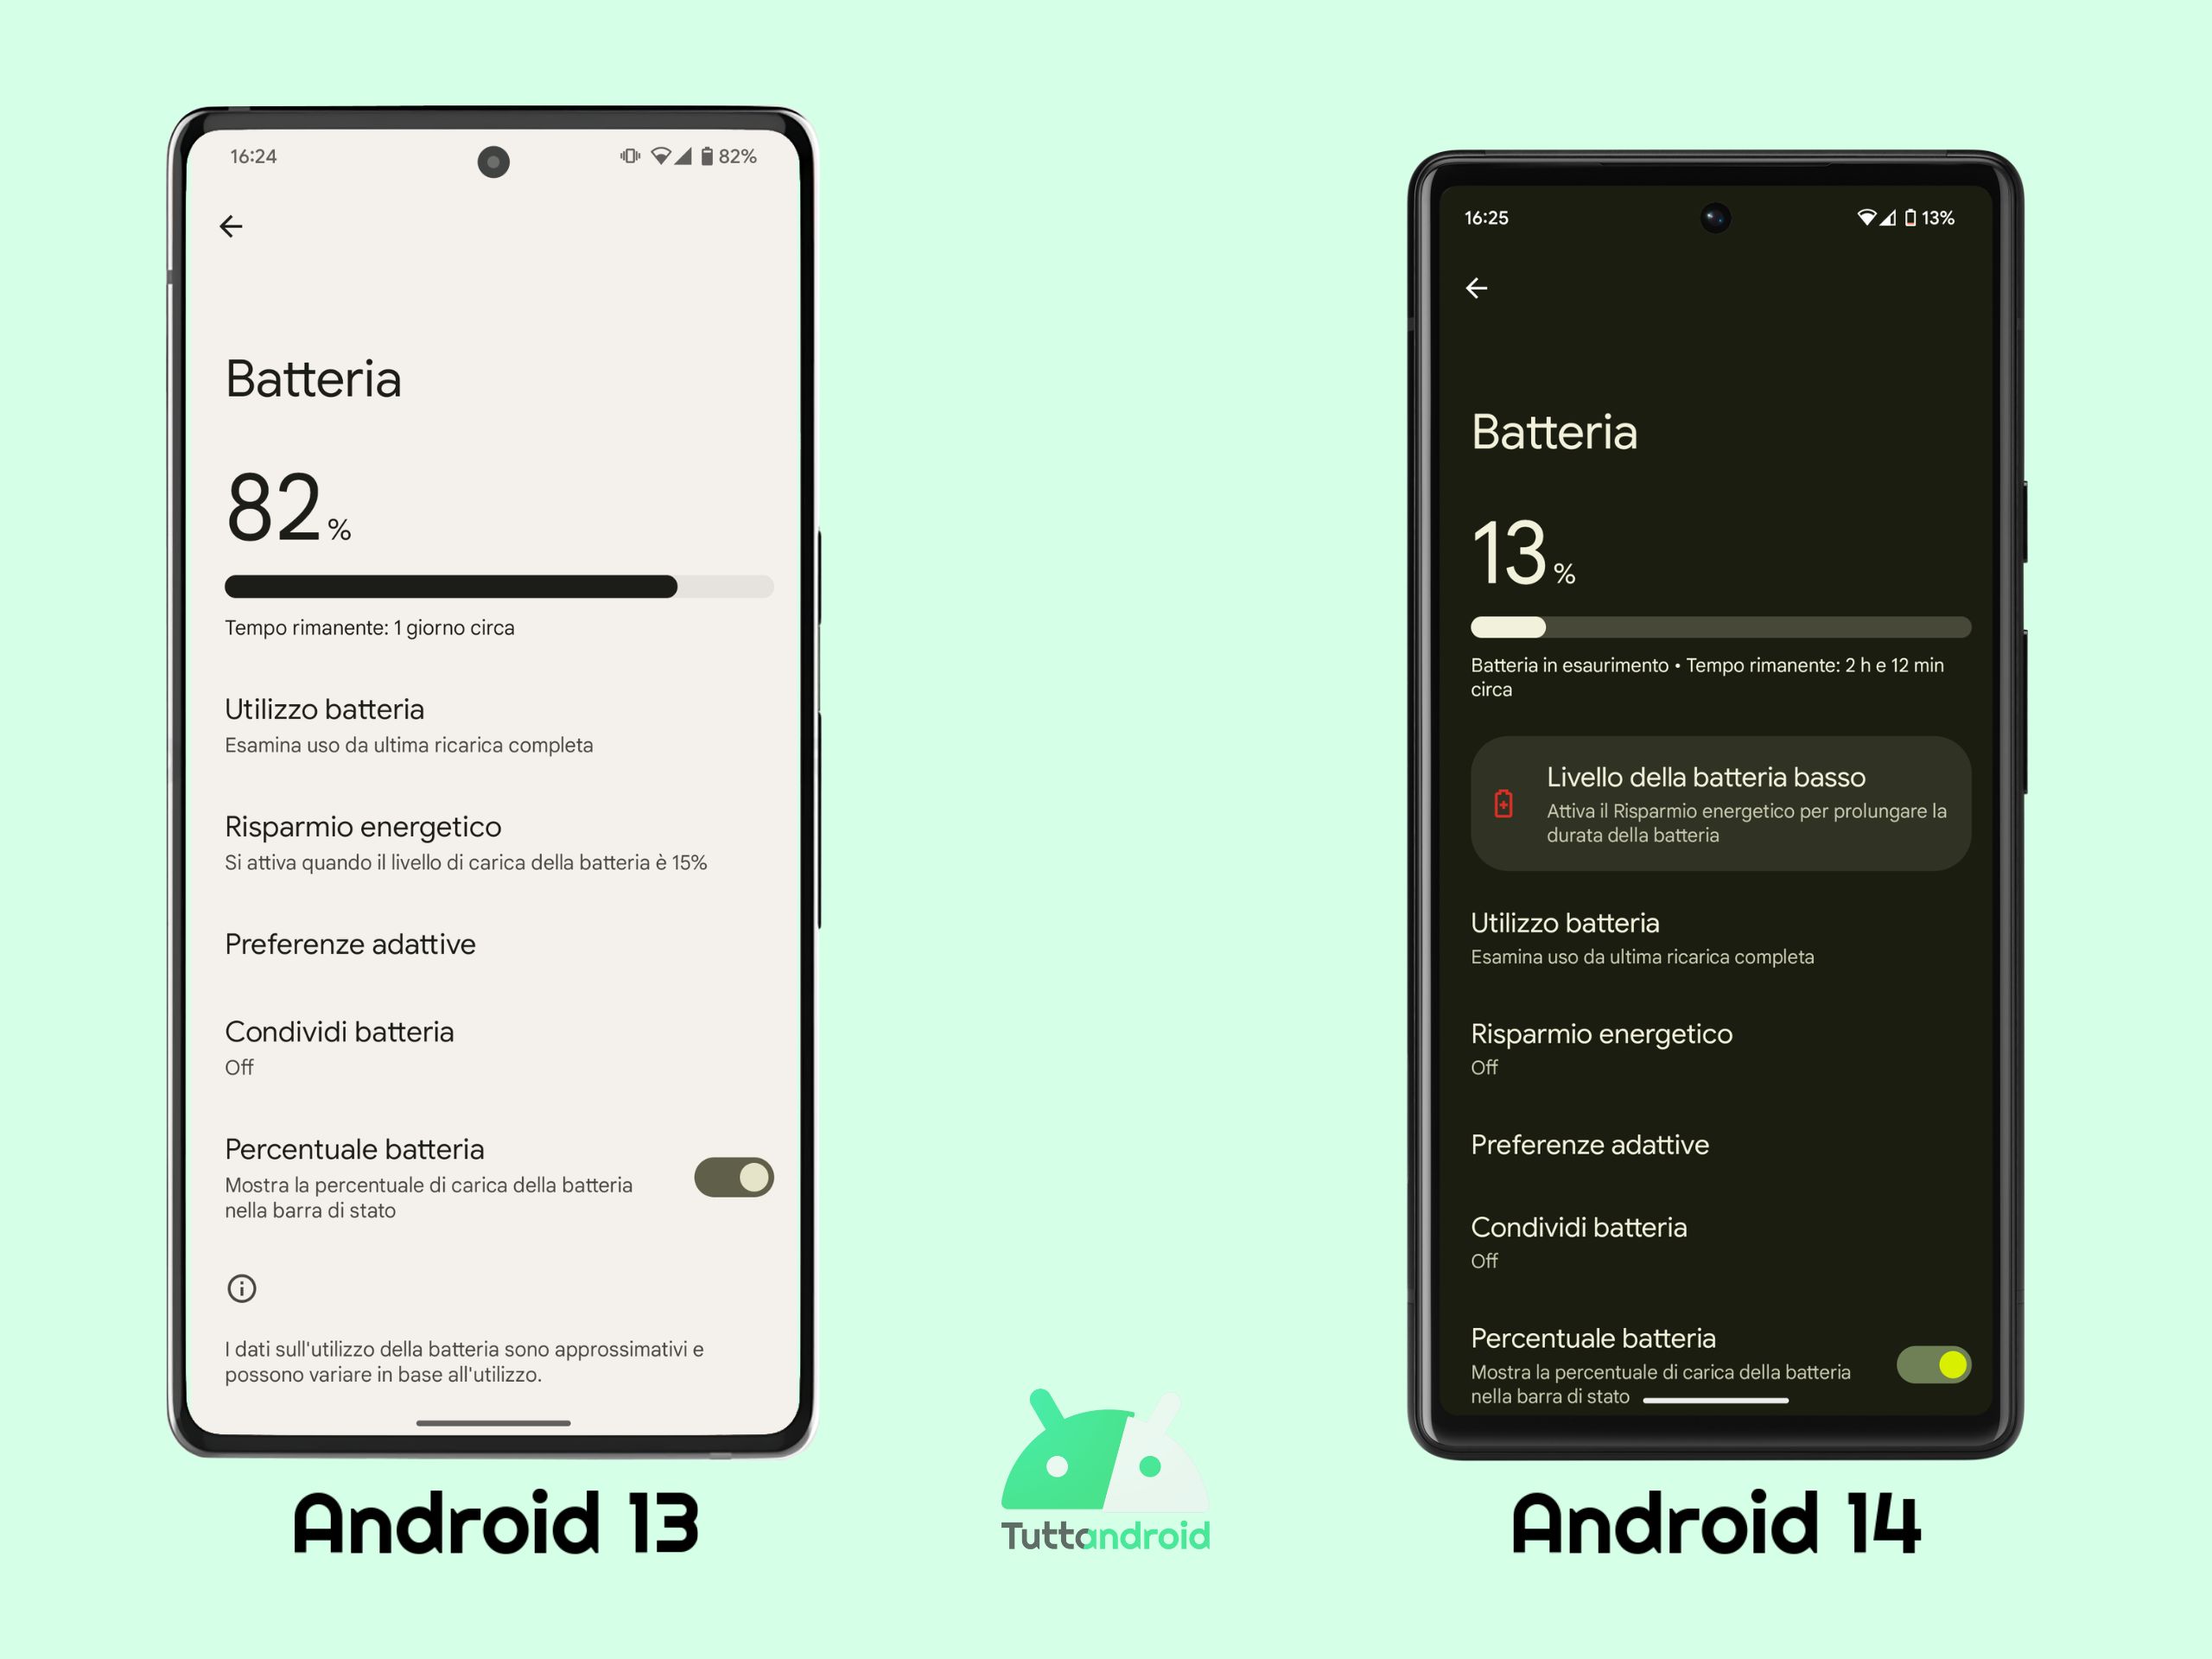 Batteria - Android 13 vs Android 14 DP1